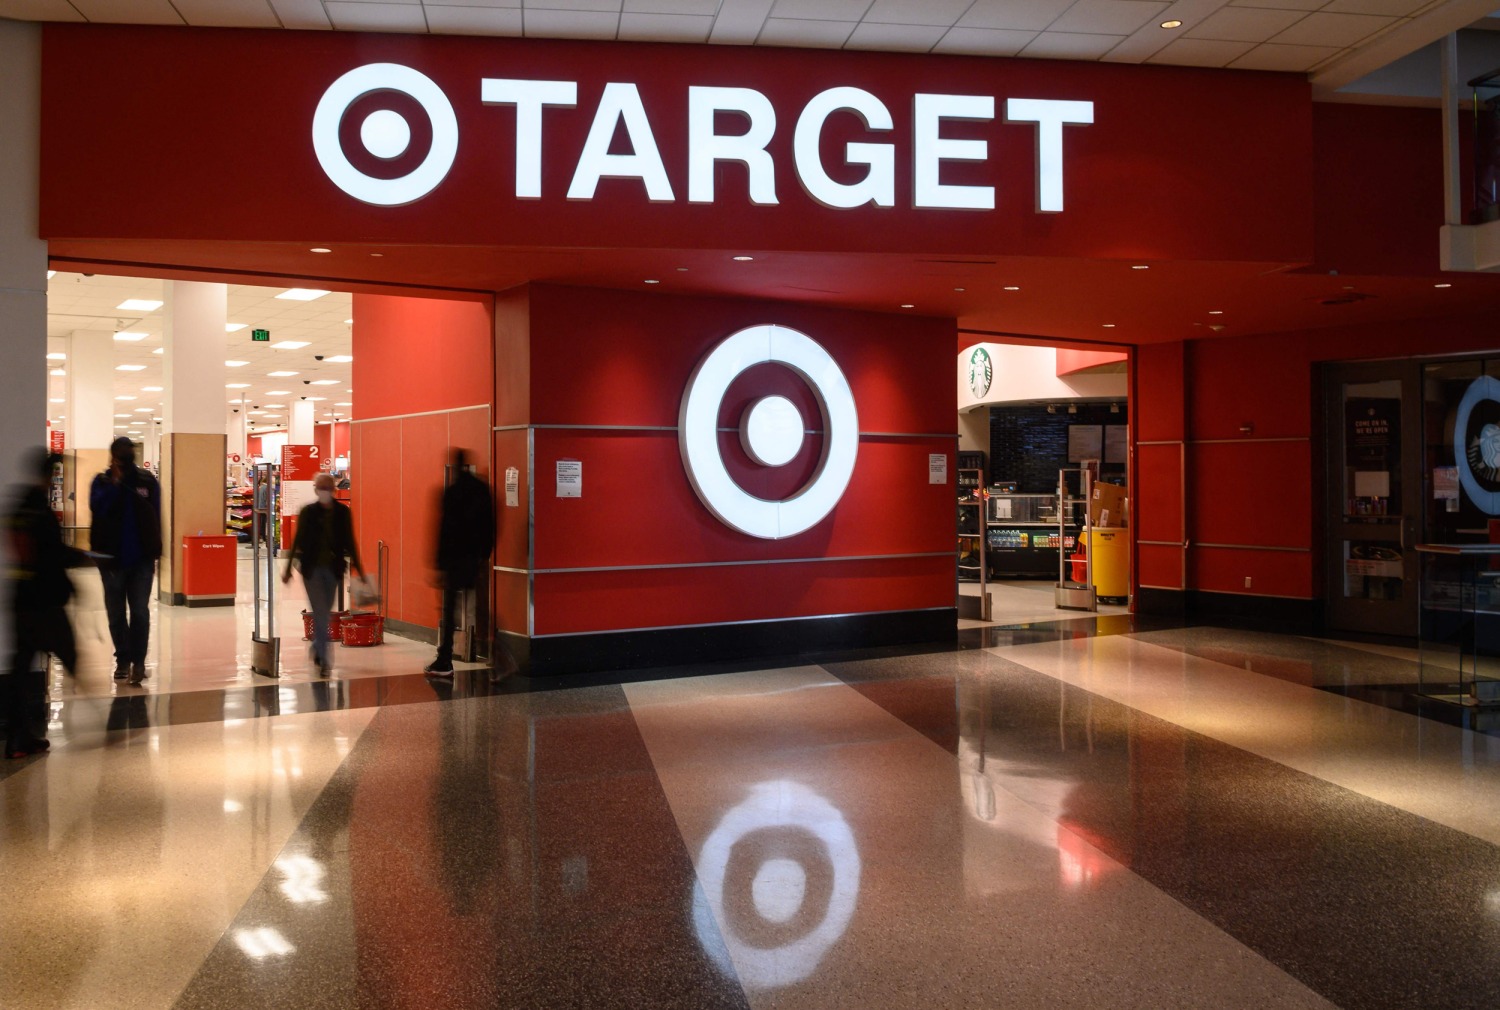 After backlash and threats, Target pulls some LGBTQ+ merchandise